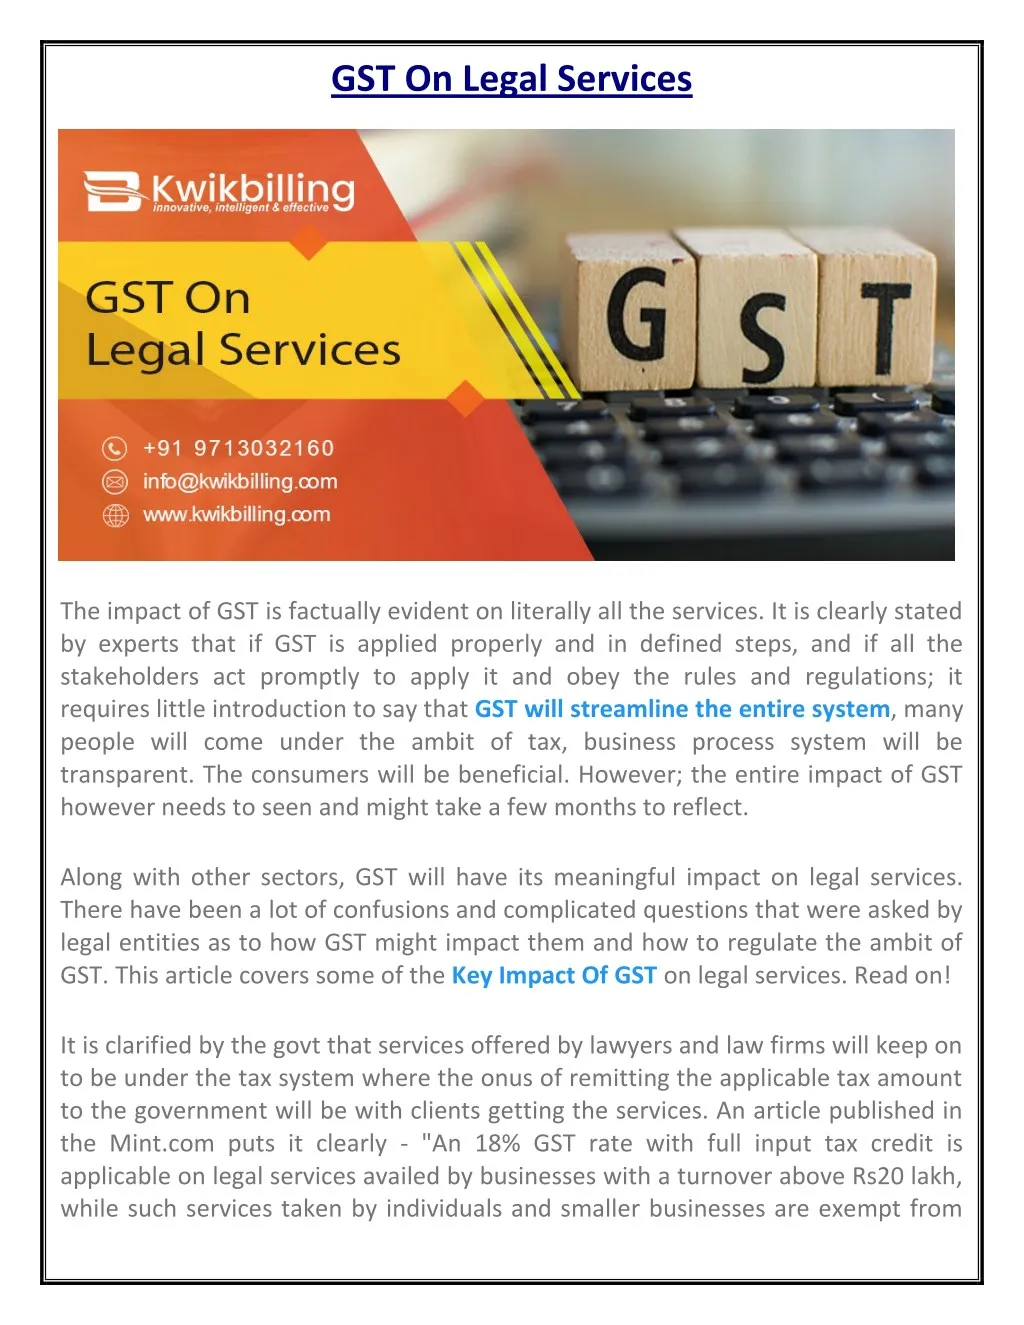 gst on legal services